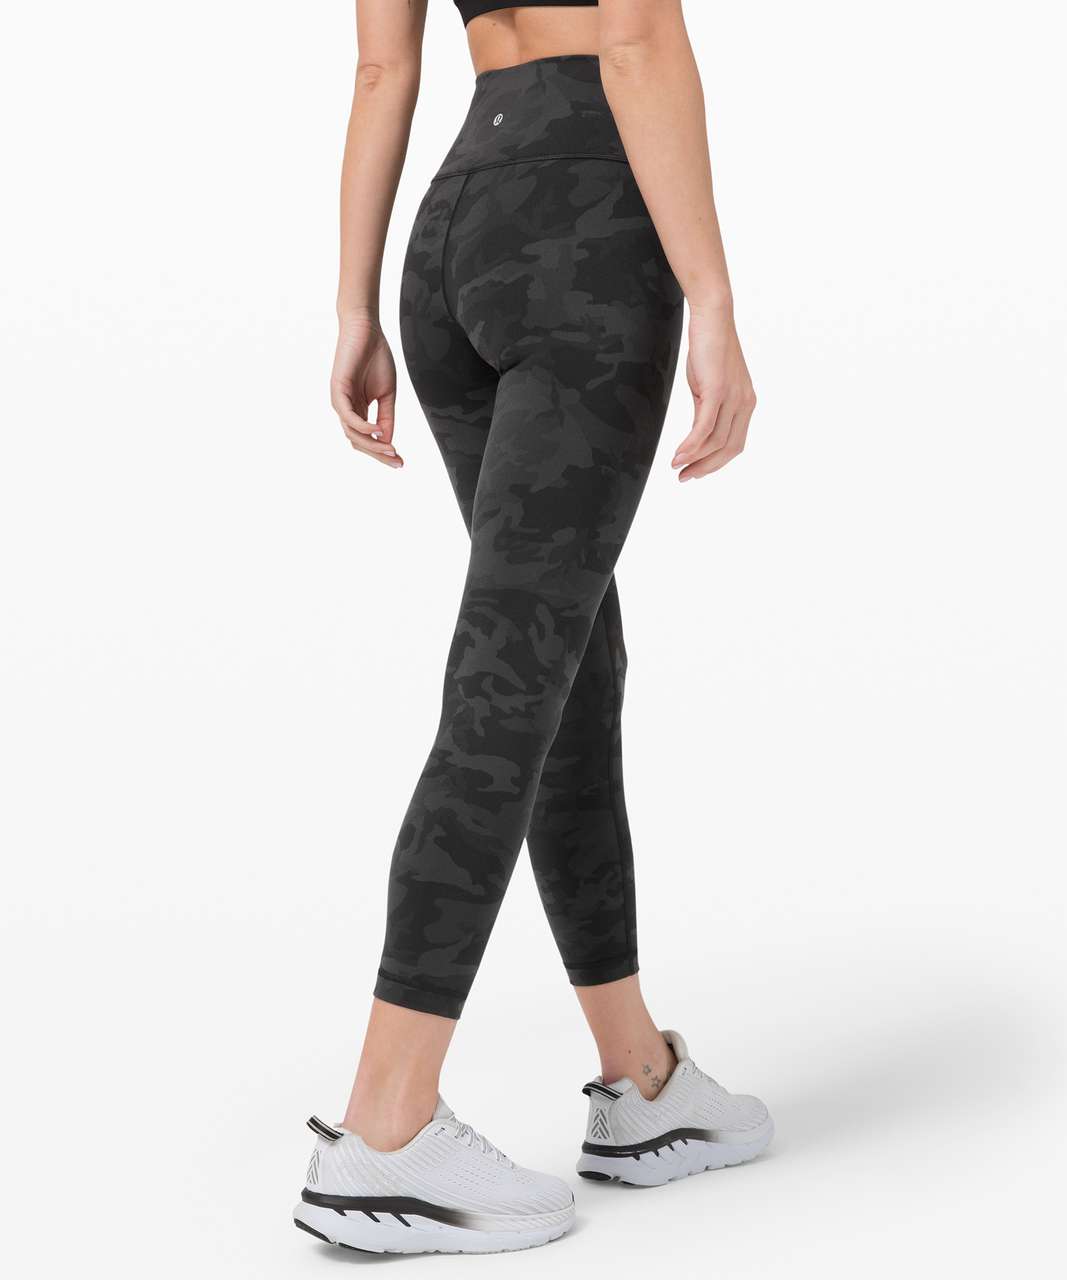 Lululemon Wunder Under High-Rise Tight 25" *Full-On Luon - Incognito Camo Multi Grey